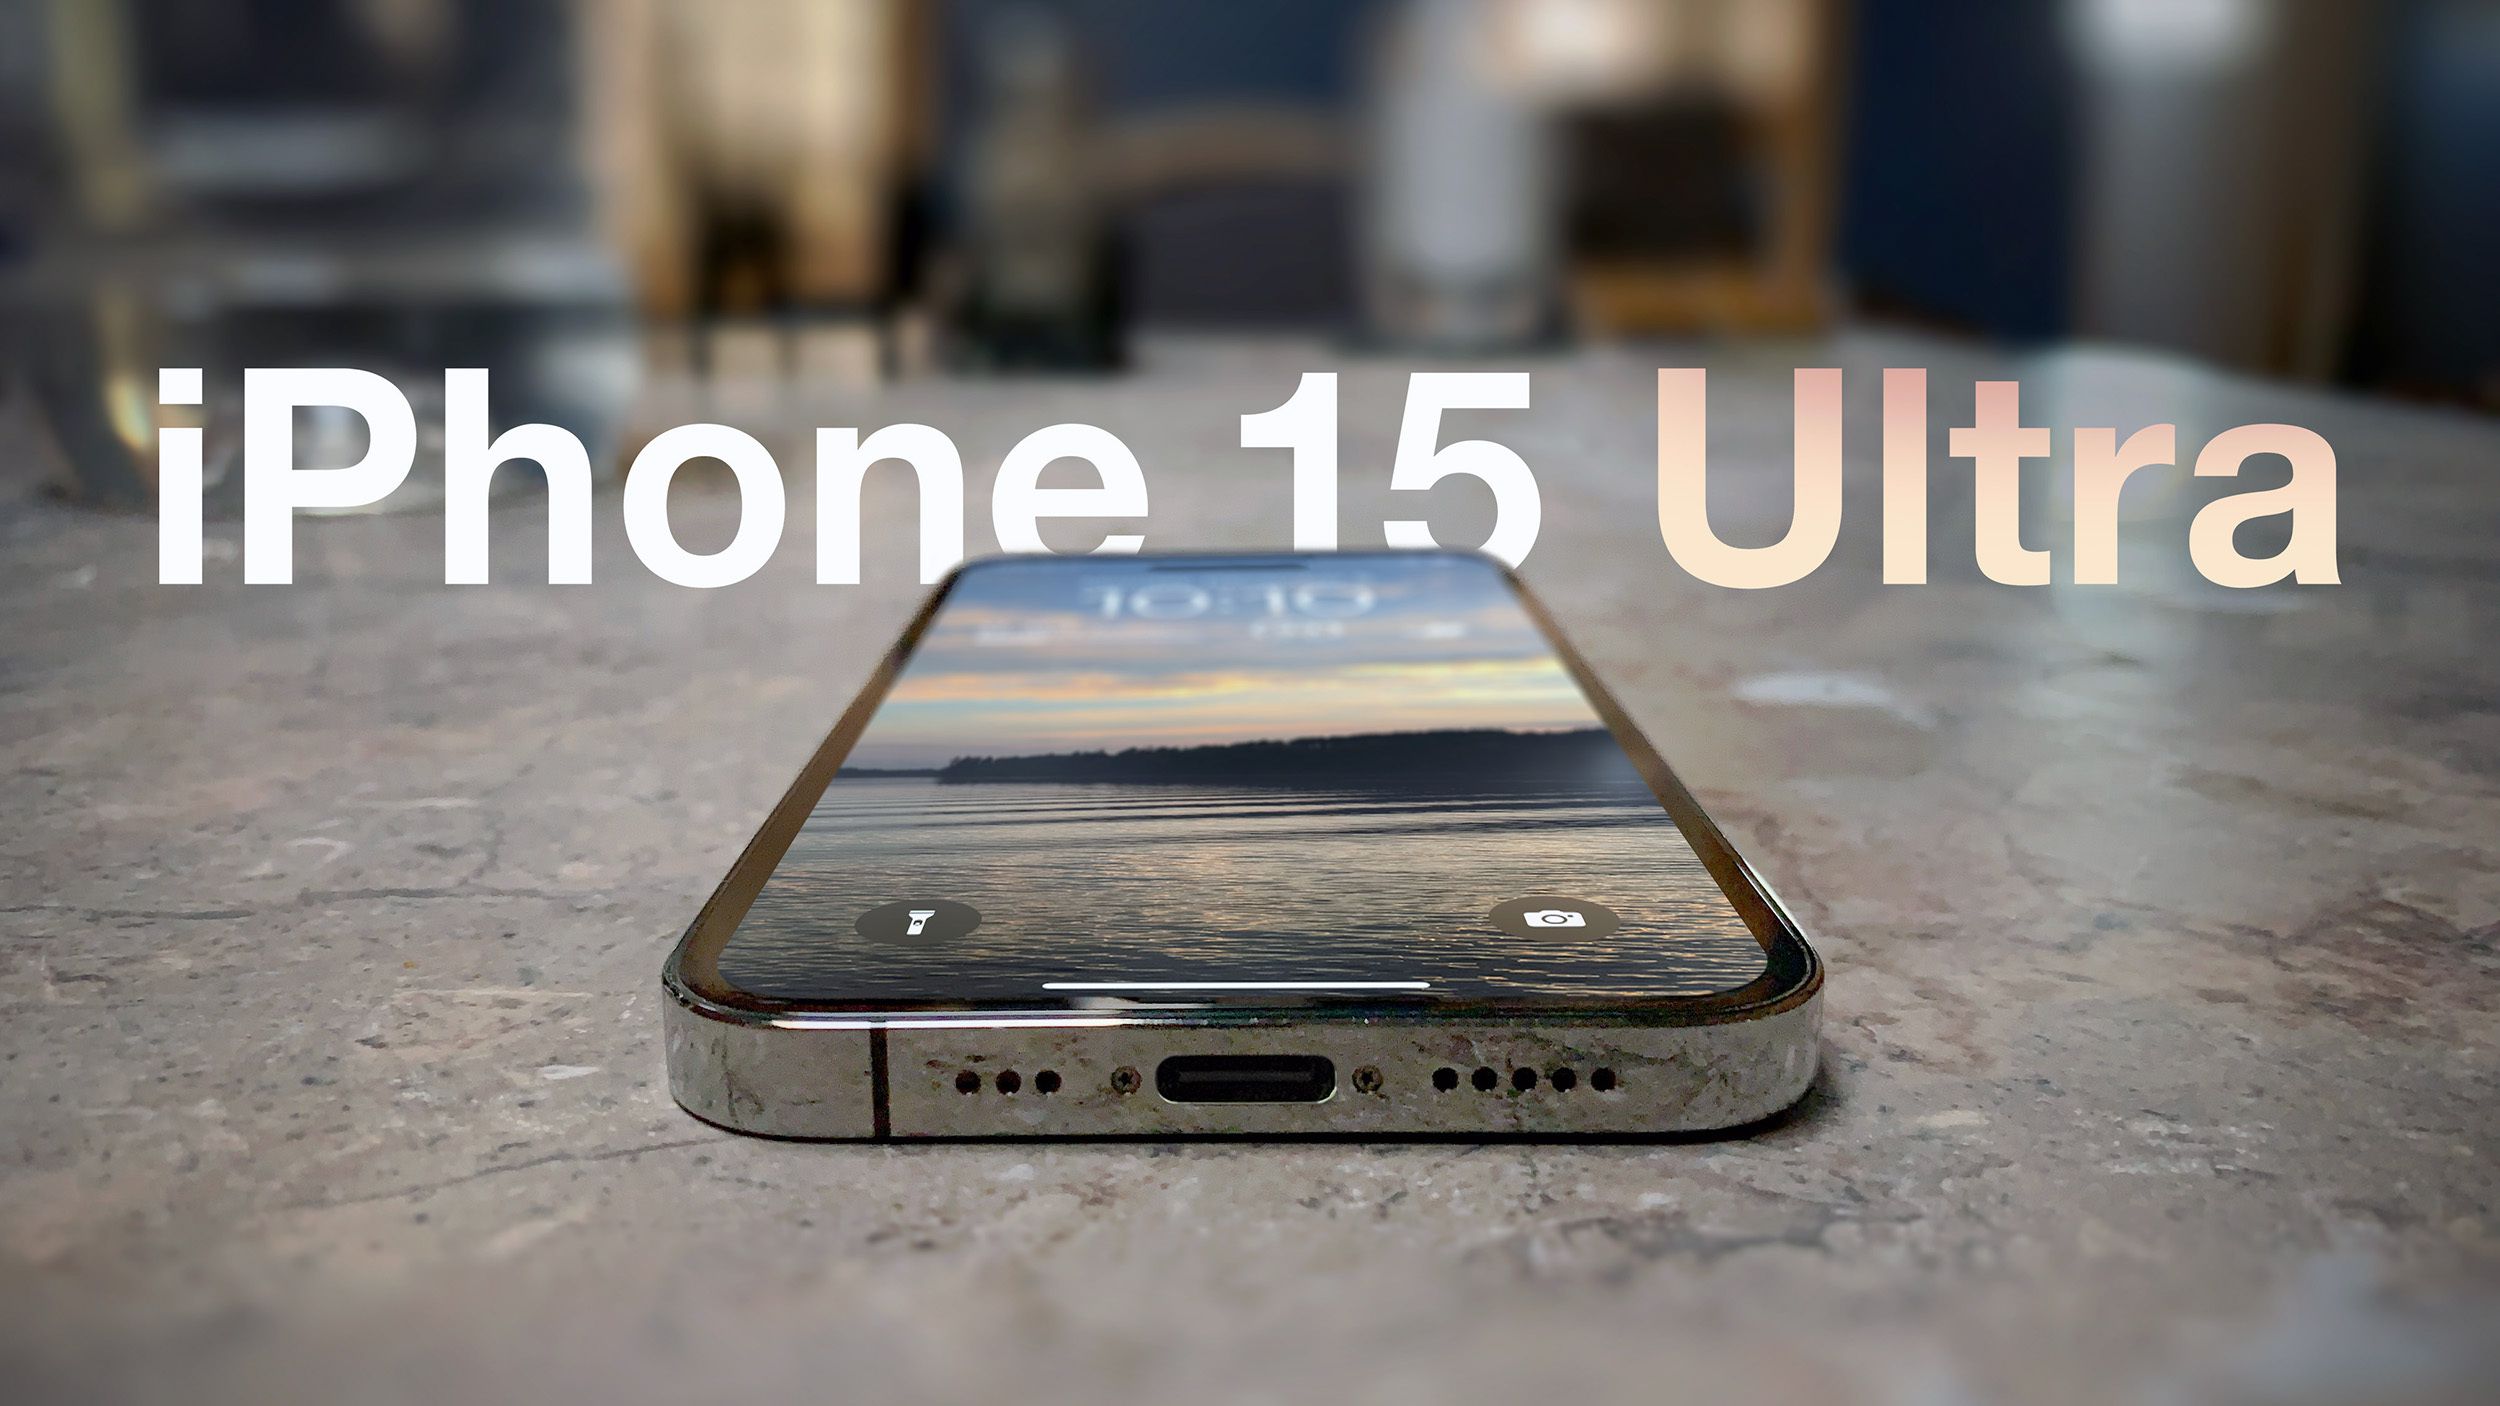 Can't Get an iPhone 14 Pro? Here's Why You Should Wait for the iPhone 15 Ultra